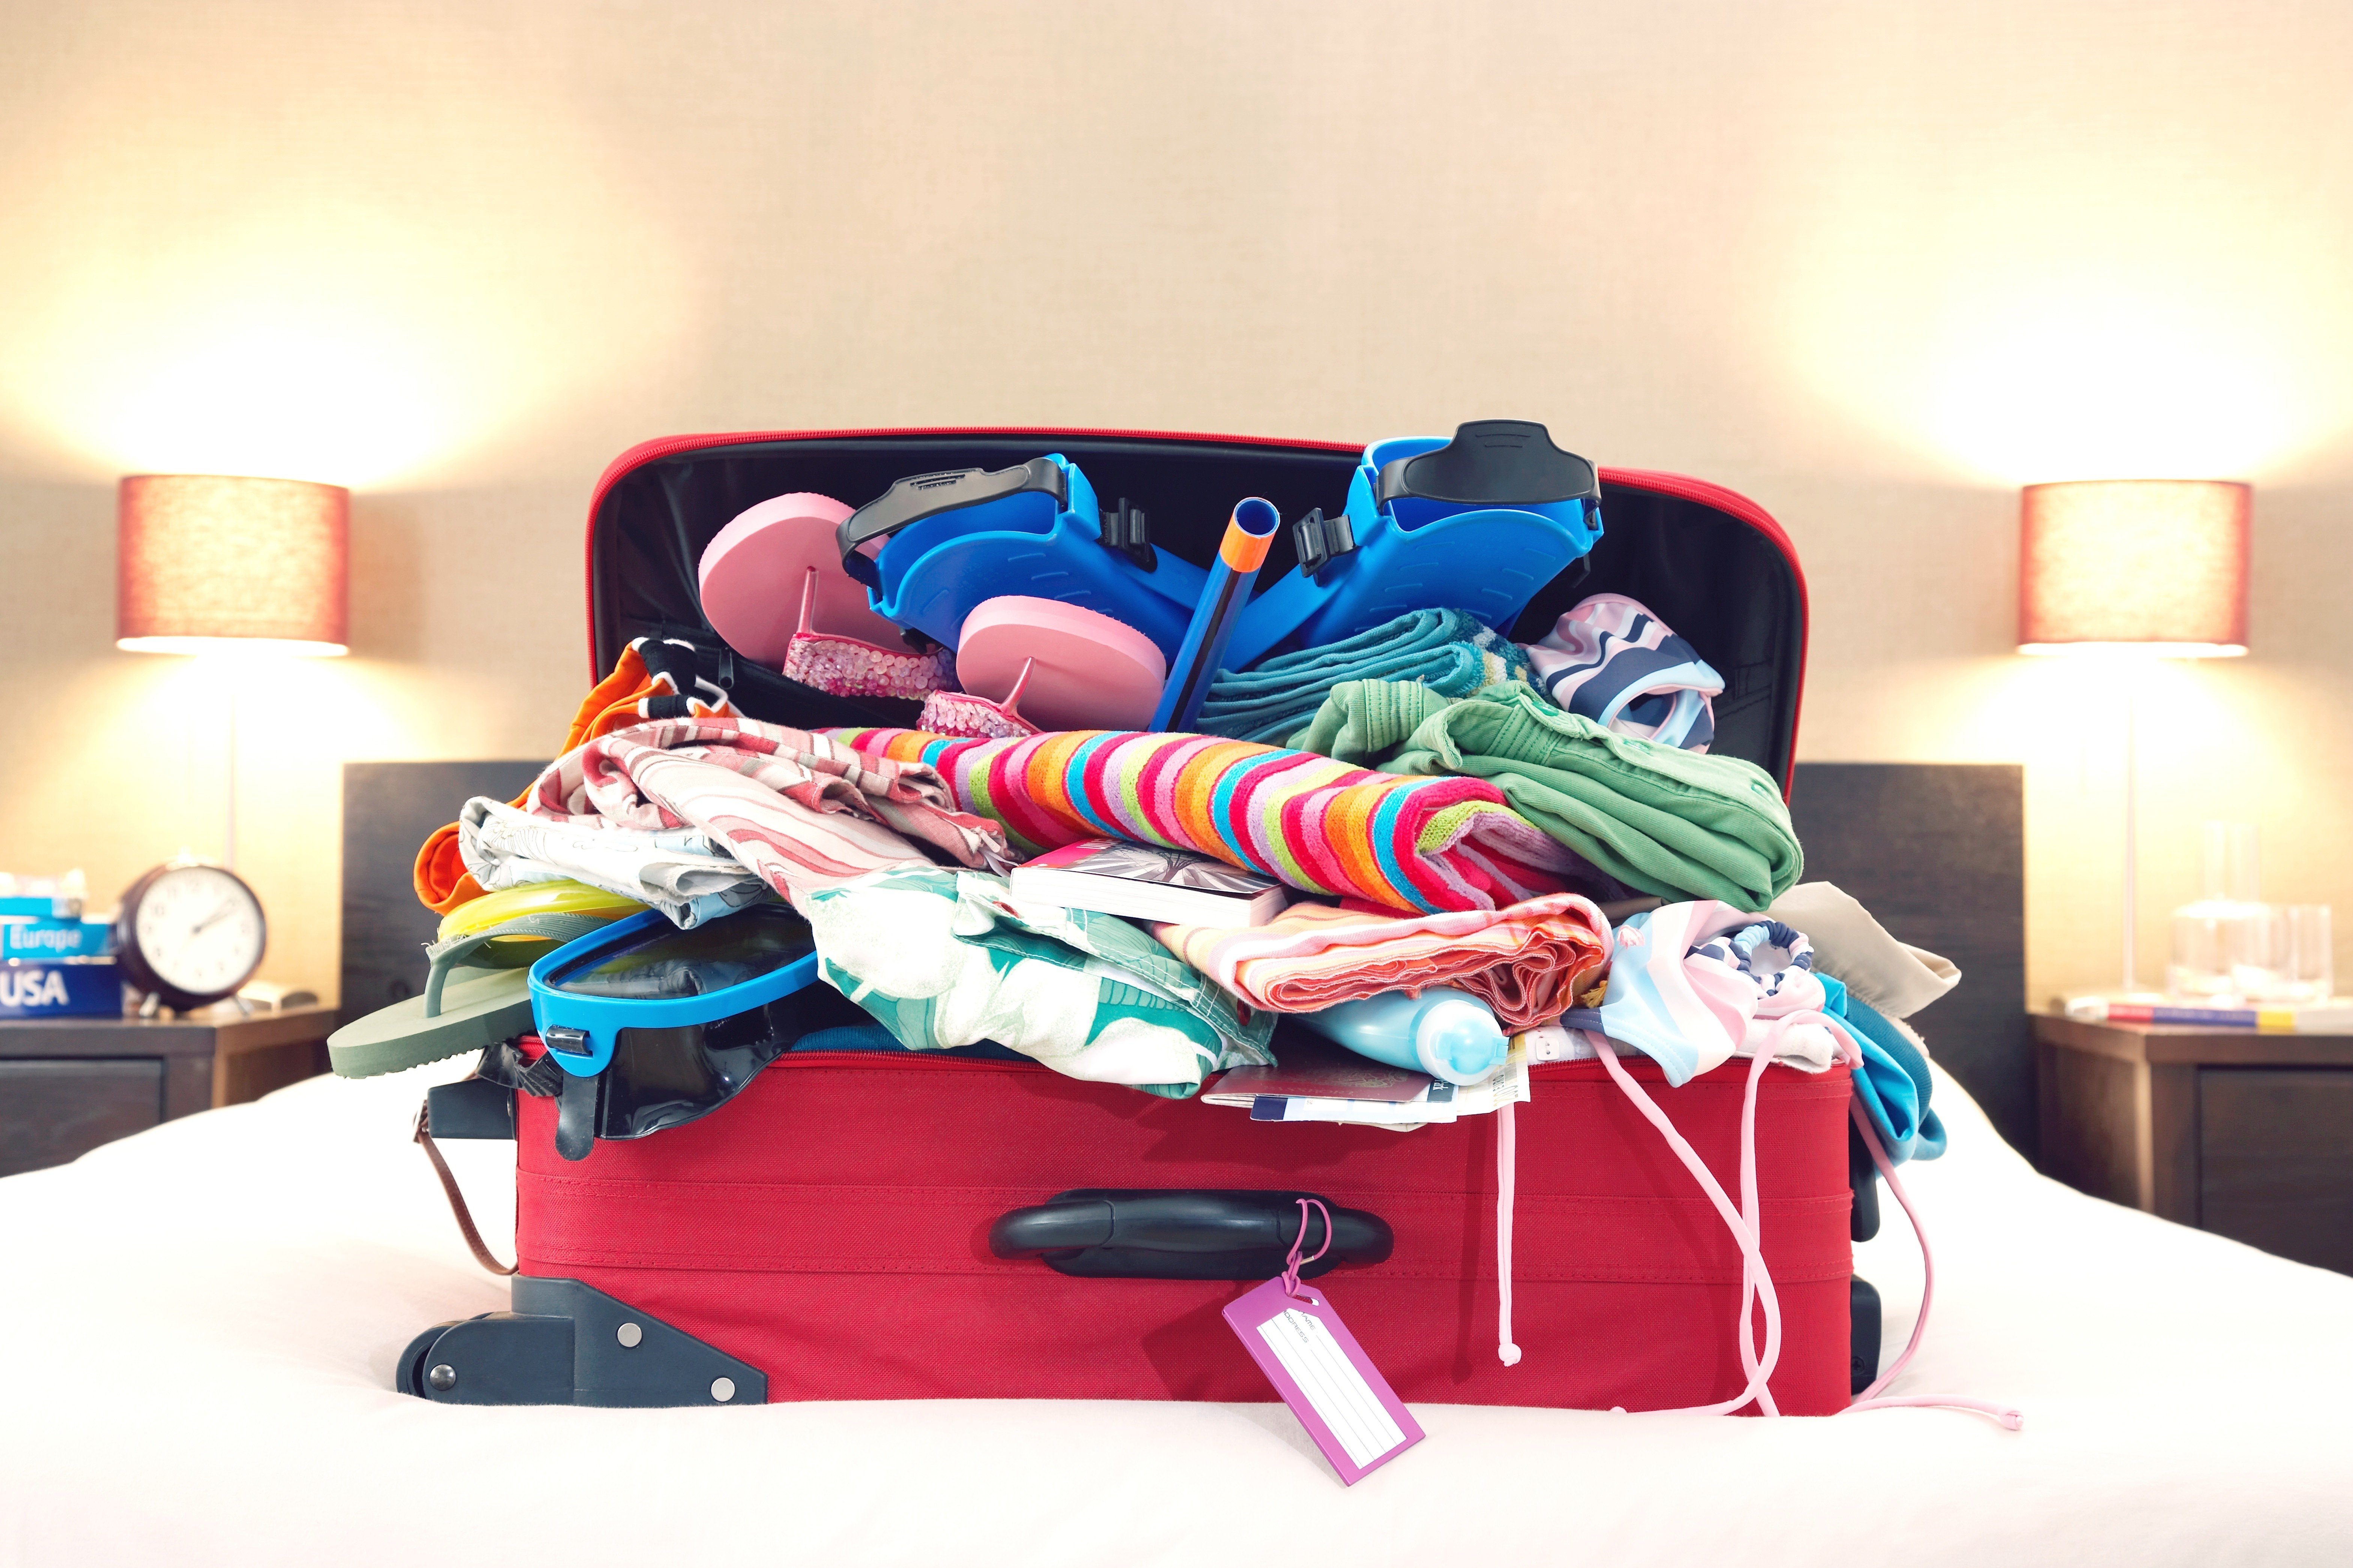 Many travellers dread the thought of unpacking their suitcase after a holiday. Photo: Shutterstock